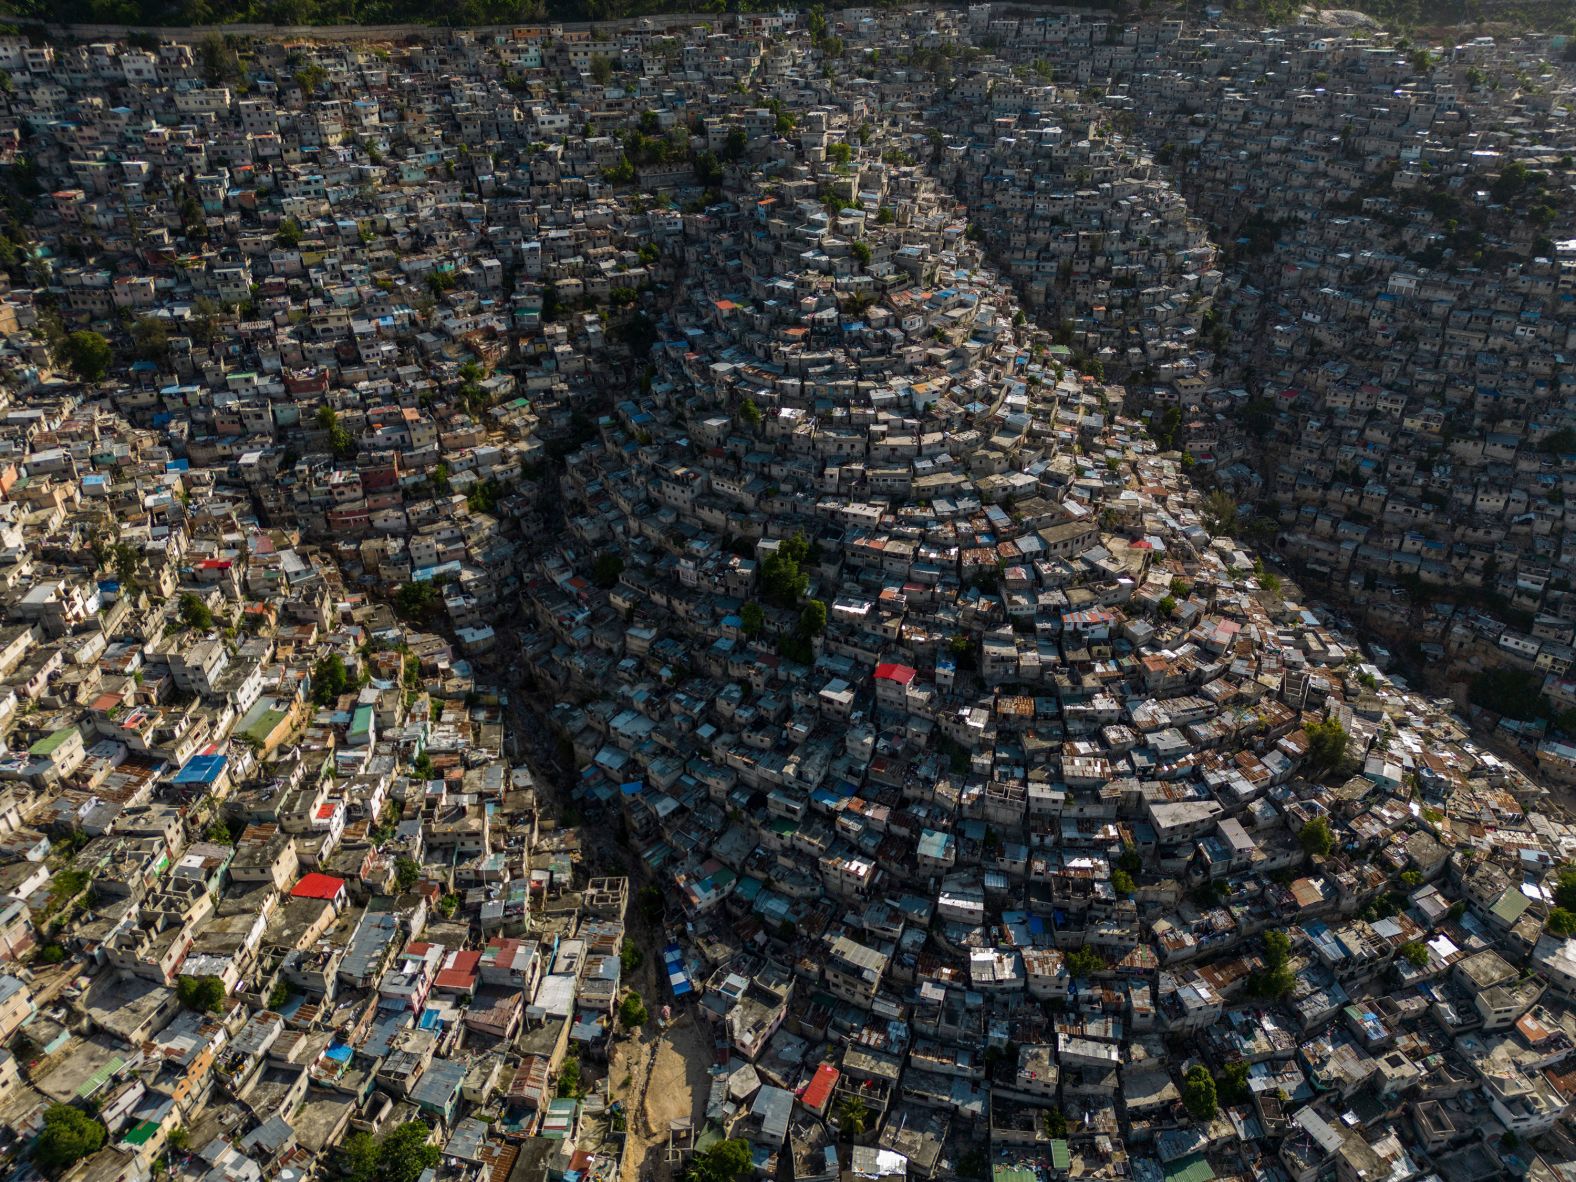 Houses sit on the slopes of the Jalousie neighborhood in Port-au-Prince, Haiti, on Monday, May 13. For more than two months, <a href="index.php?page=&url=https%3A%2F%2Fwww.cnn.com%2F2024%2F05%2F13%2Famericas%2Fhaiti-mss-unodc-guns-drugs-intl-latam%2Findex.html" target="_blank">Port-au-Prince has been cut off from the world</a>, its international seaport and airport shuttered following an explosion of gang attacks in late February.